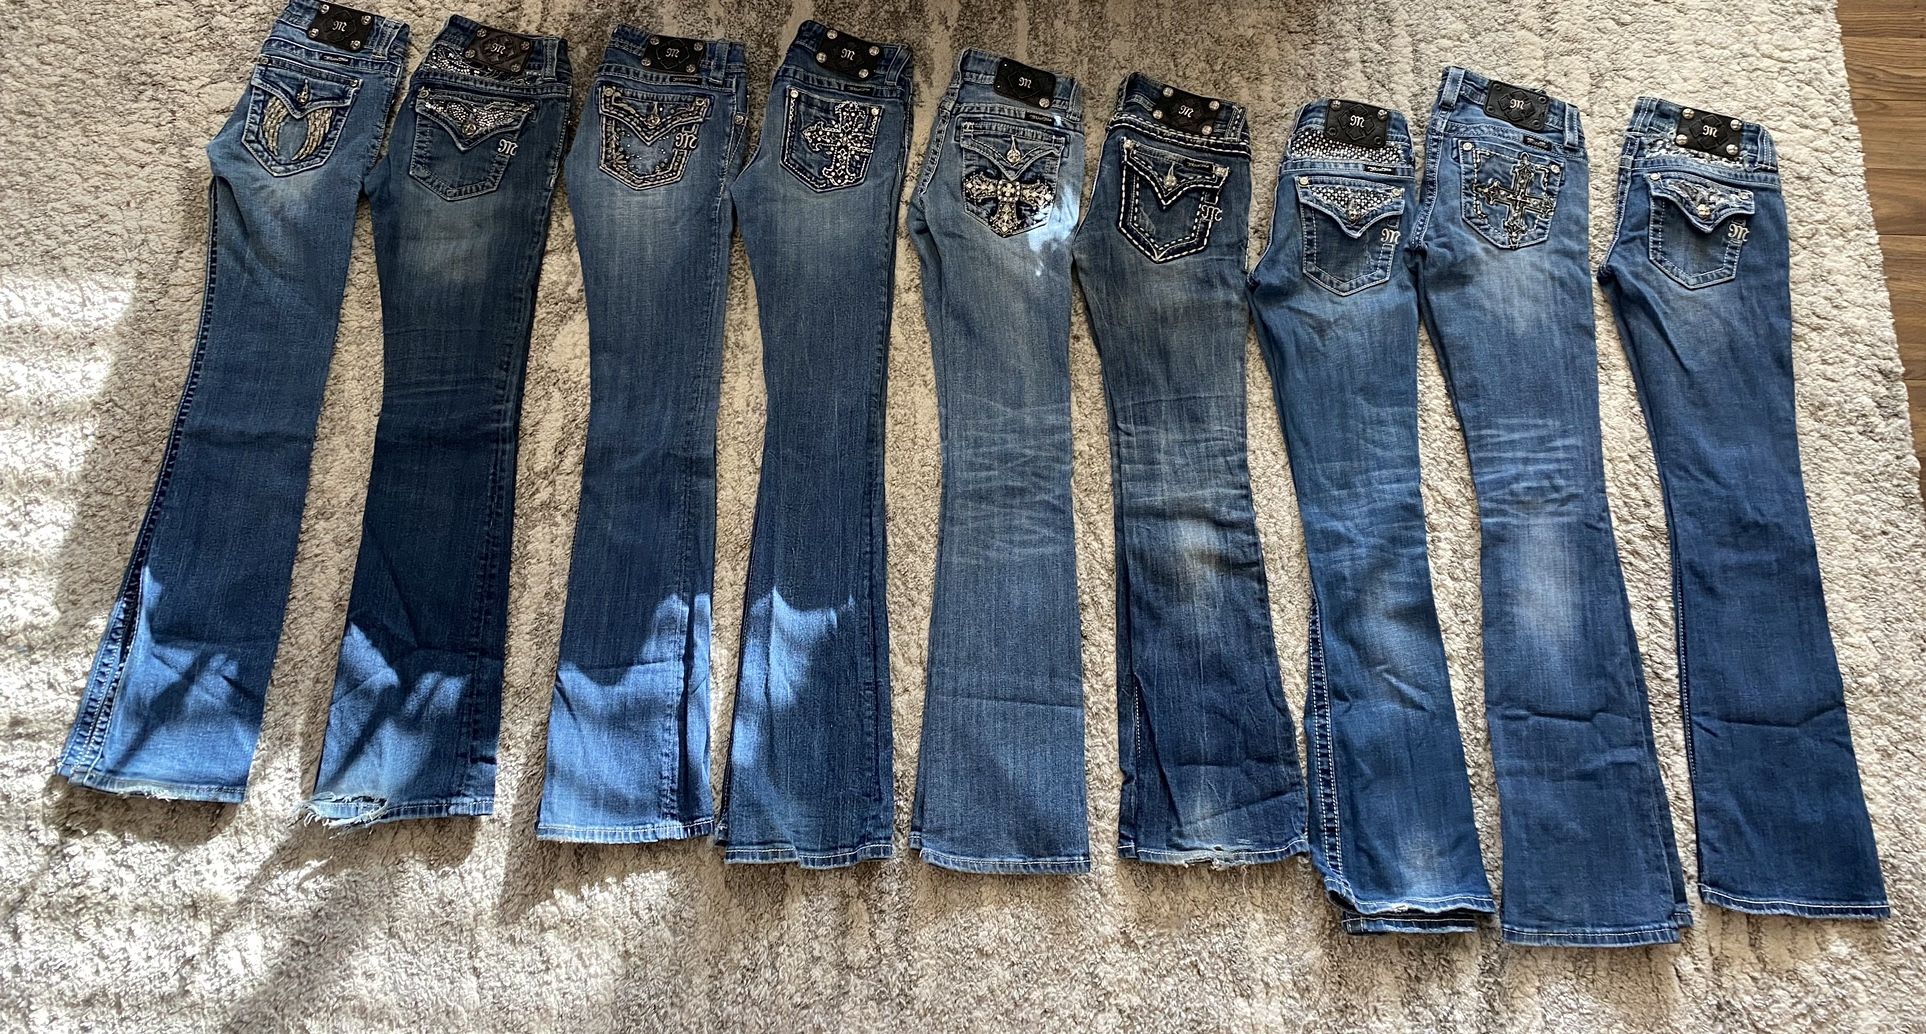 Miss me jeans Lot 9 pairs Size:25 Boot $200 OBO 